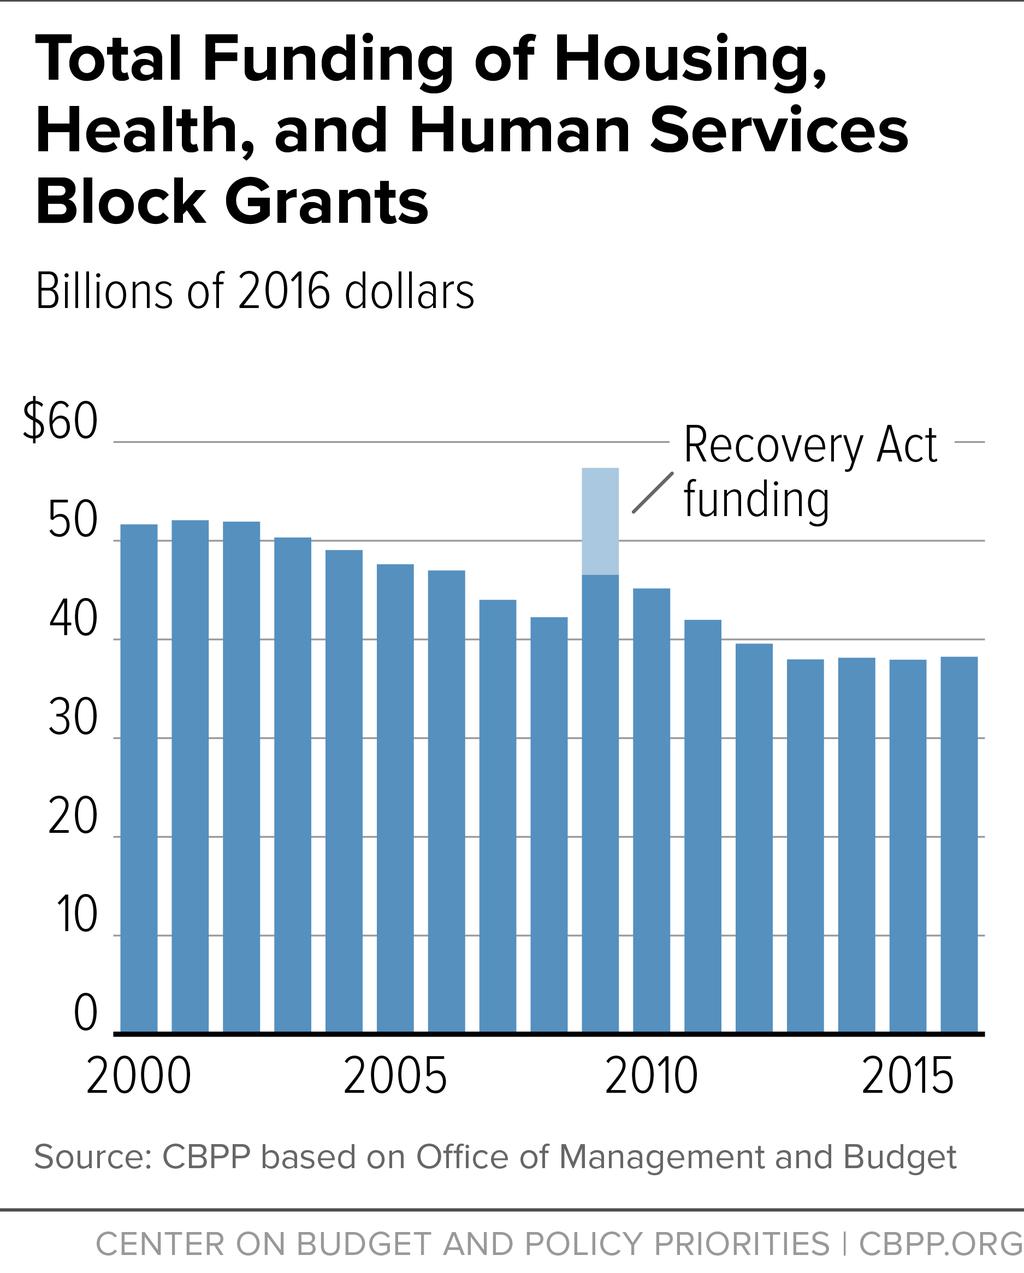 Year-by-Year Analysis Shows Falling Funding Since 2000 A year-by-year analysis of funding for these block grants since 2000 shows that overall funding for the 13 health, housing, and social services